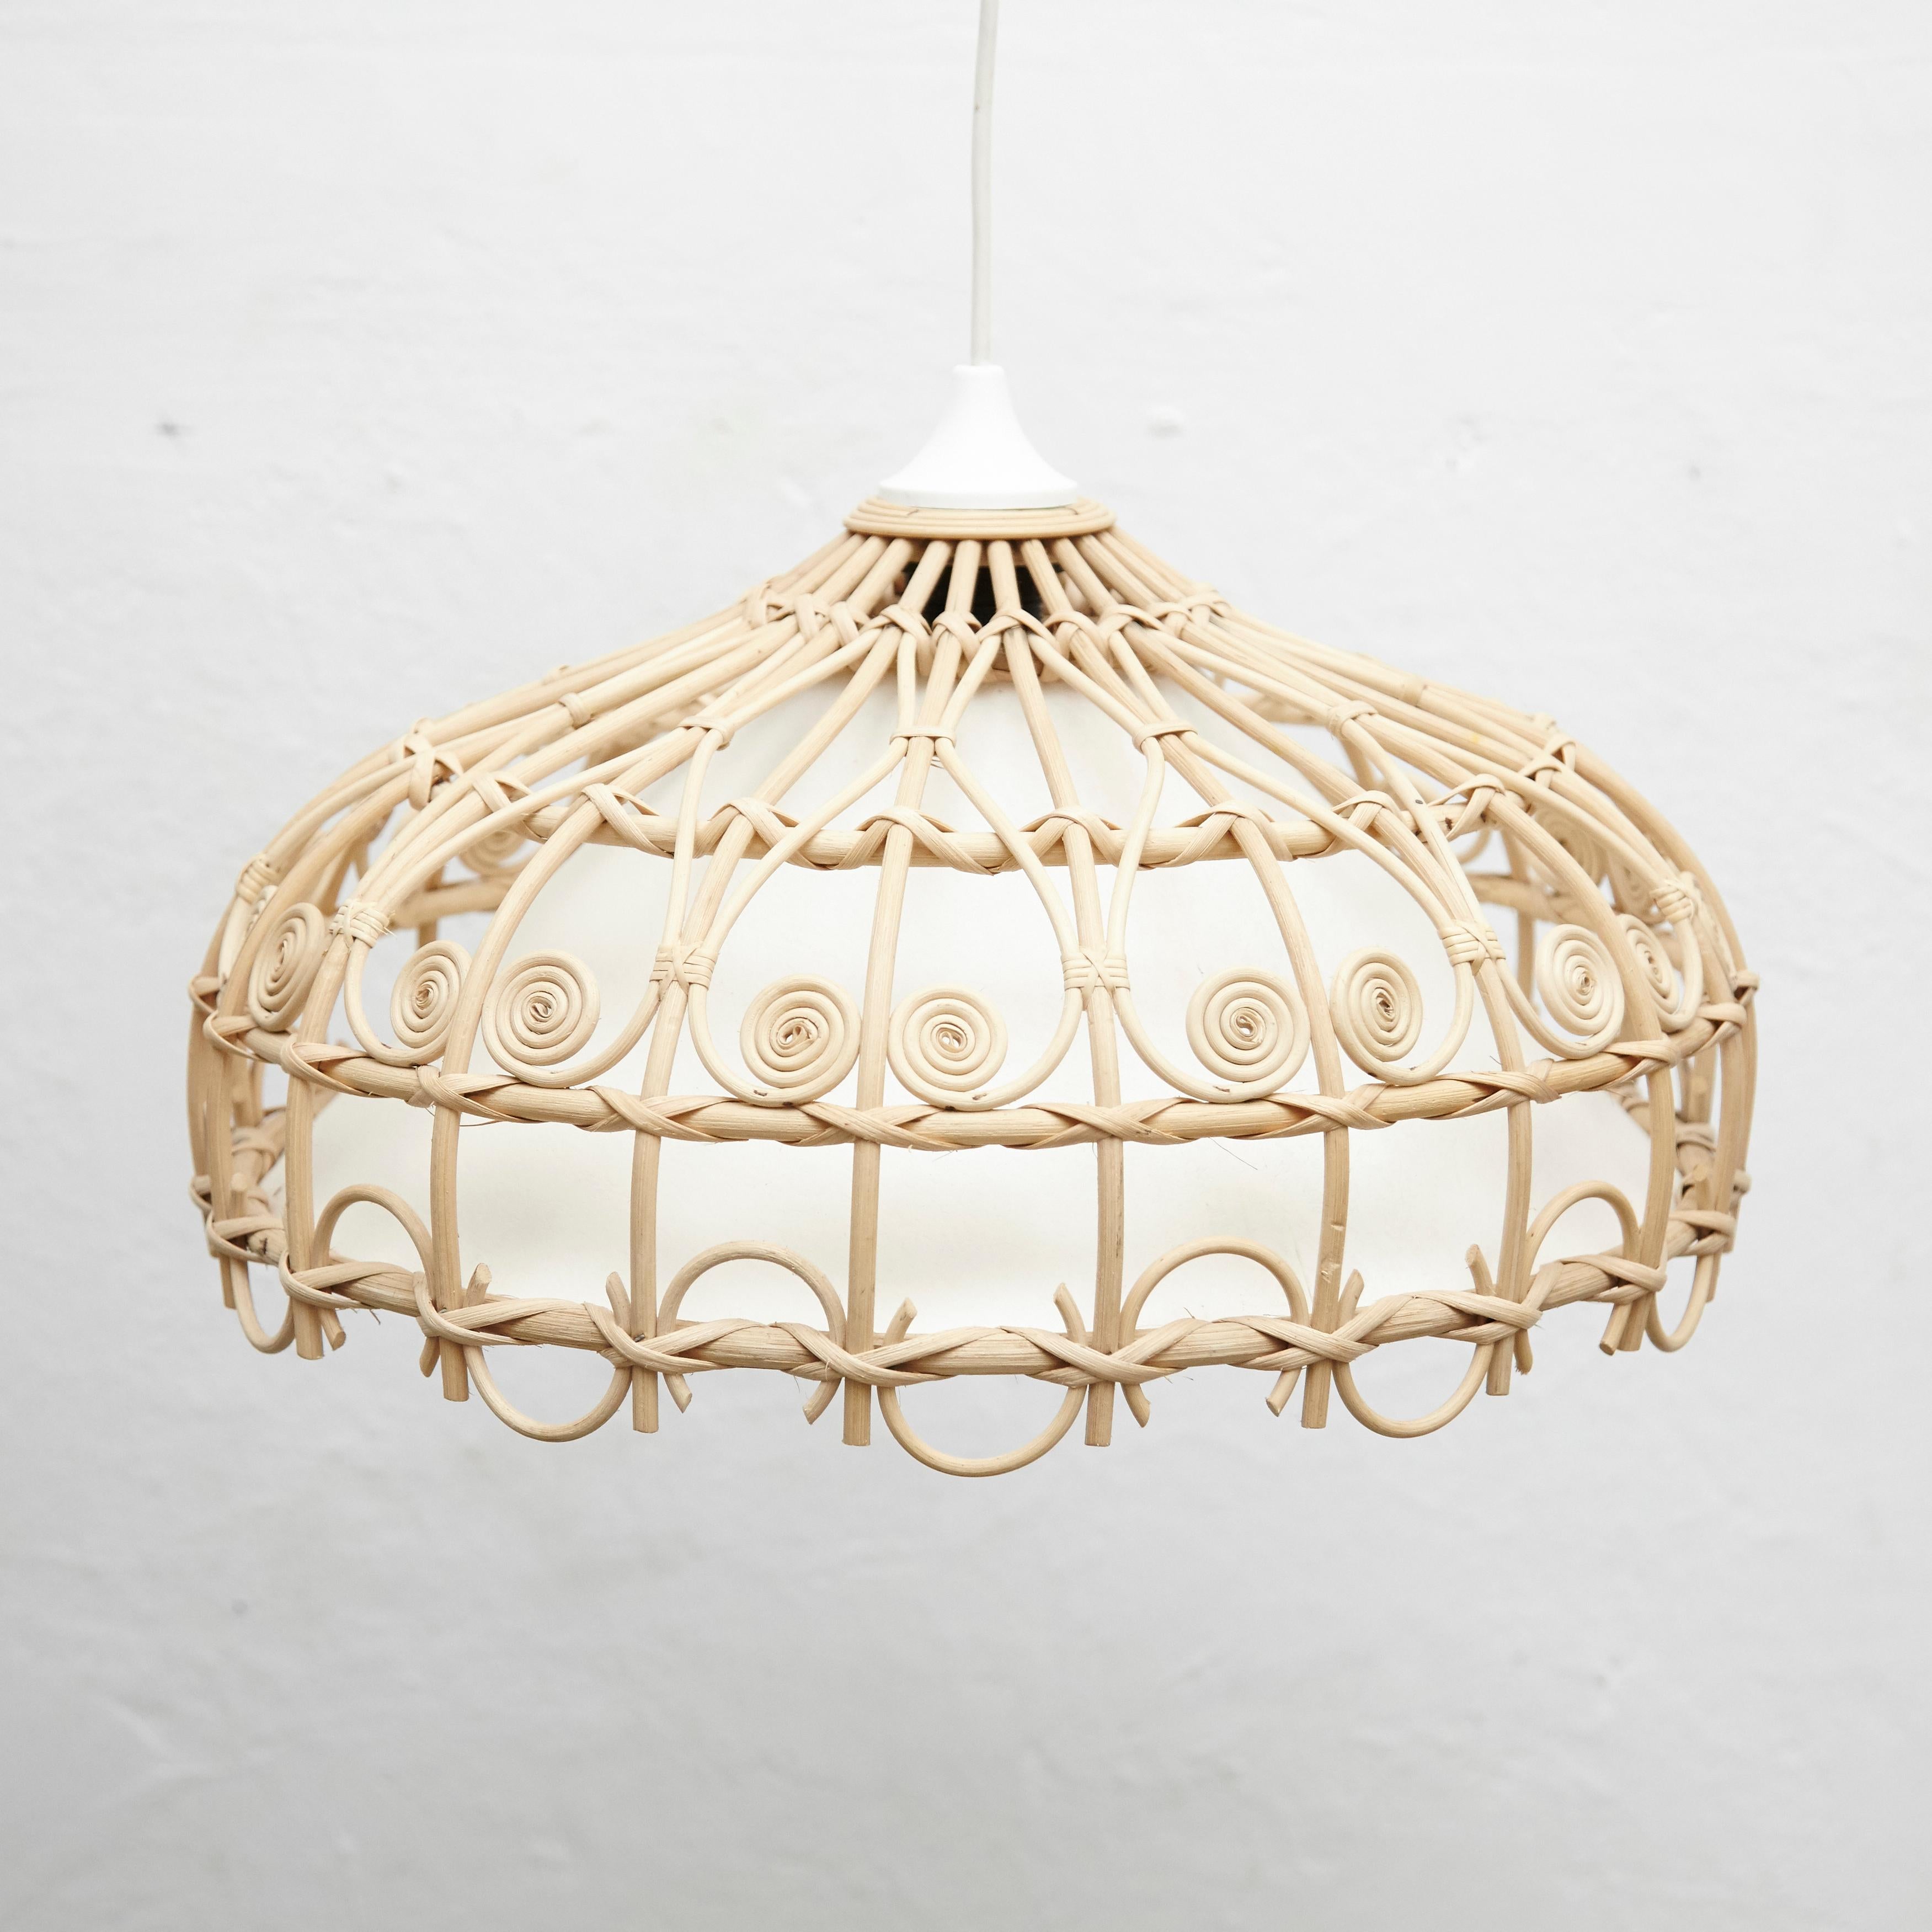 Rustic traditional Rattan ceiling lamp by unknown artisan, Spain, circa 1980.
In original condition, with minor wear consistent with age and use, preserving a beautiful patina.

Materials:
Rattan

Dimensions:
ø 47 cm x H 28 cm.